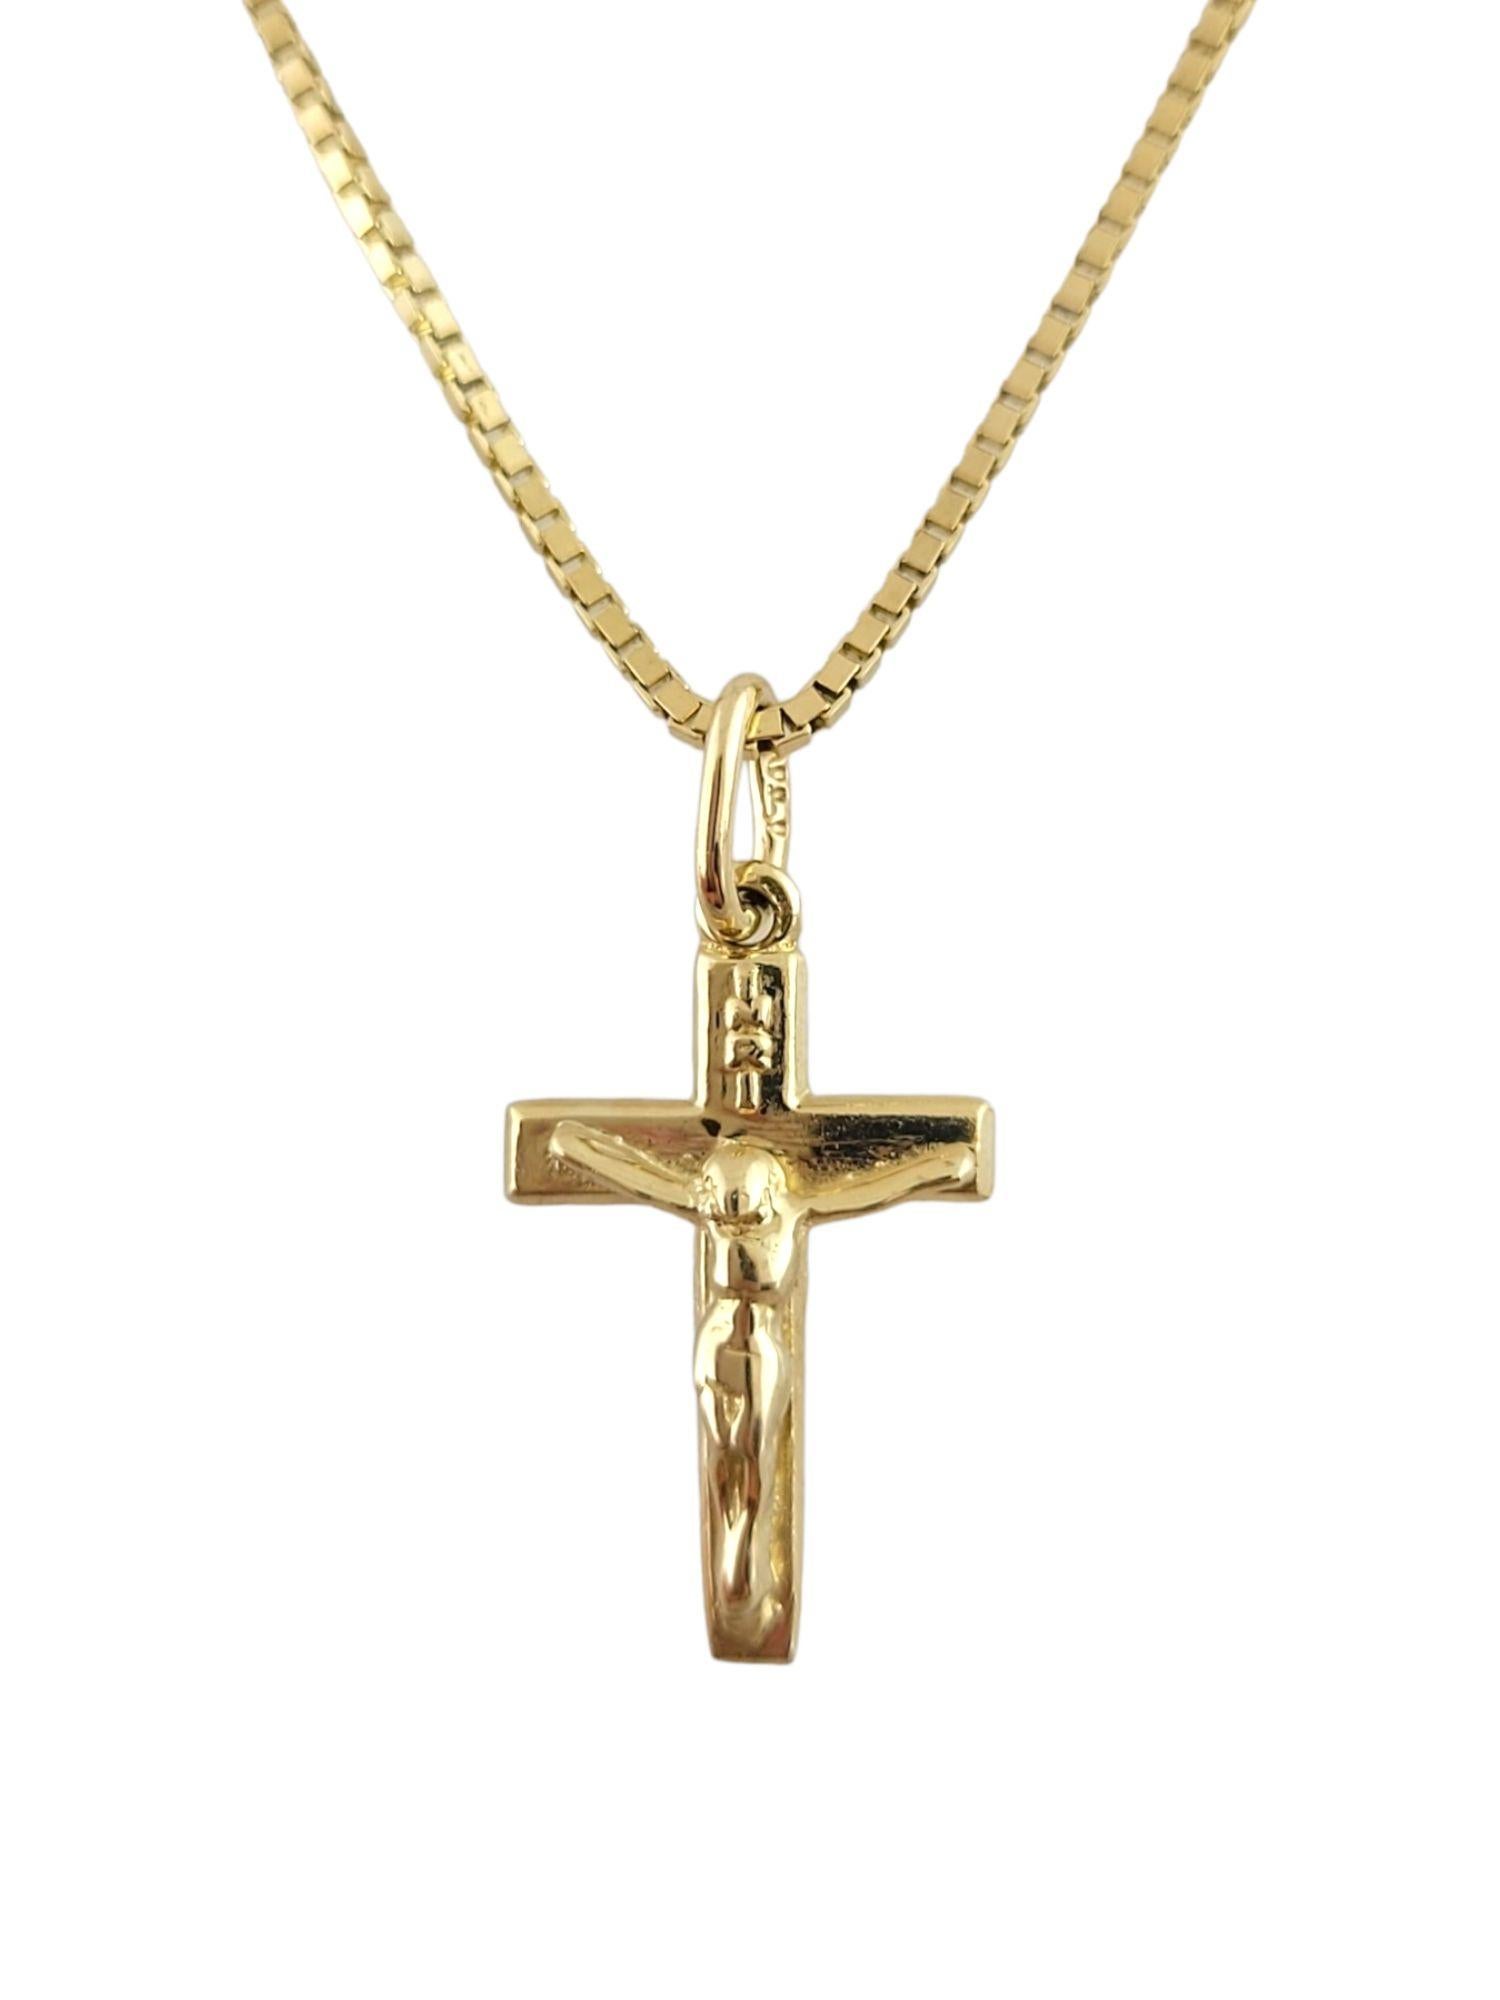 This 14K yellow gold box chain is paired with a beautiful 14K gold cross pendant!

Chain length: 16 1/2